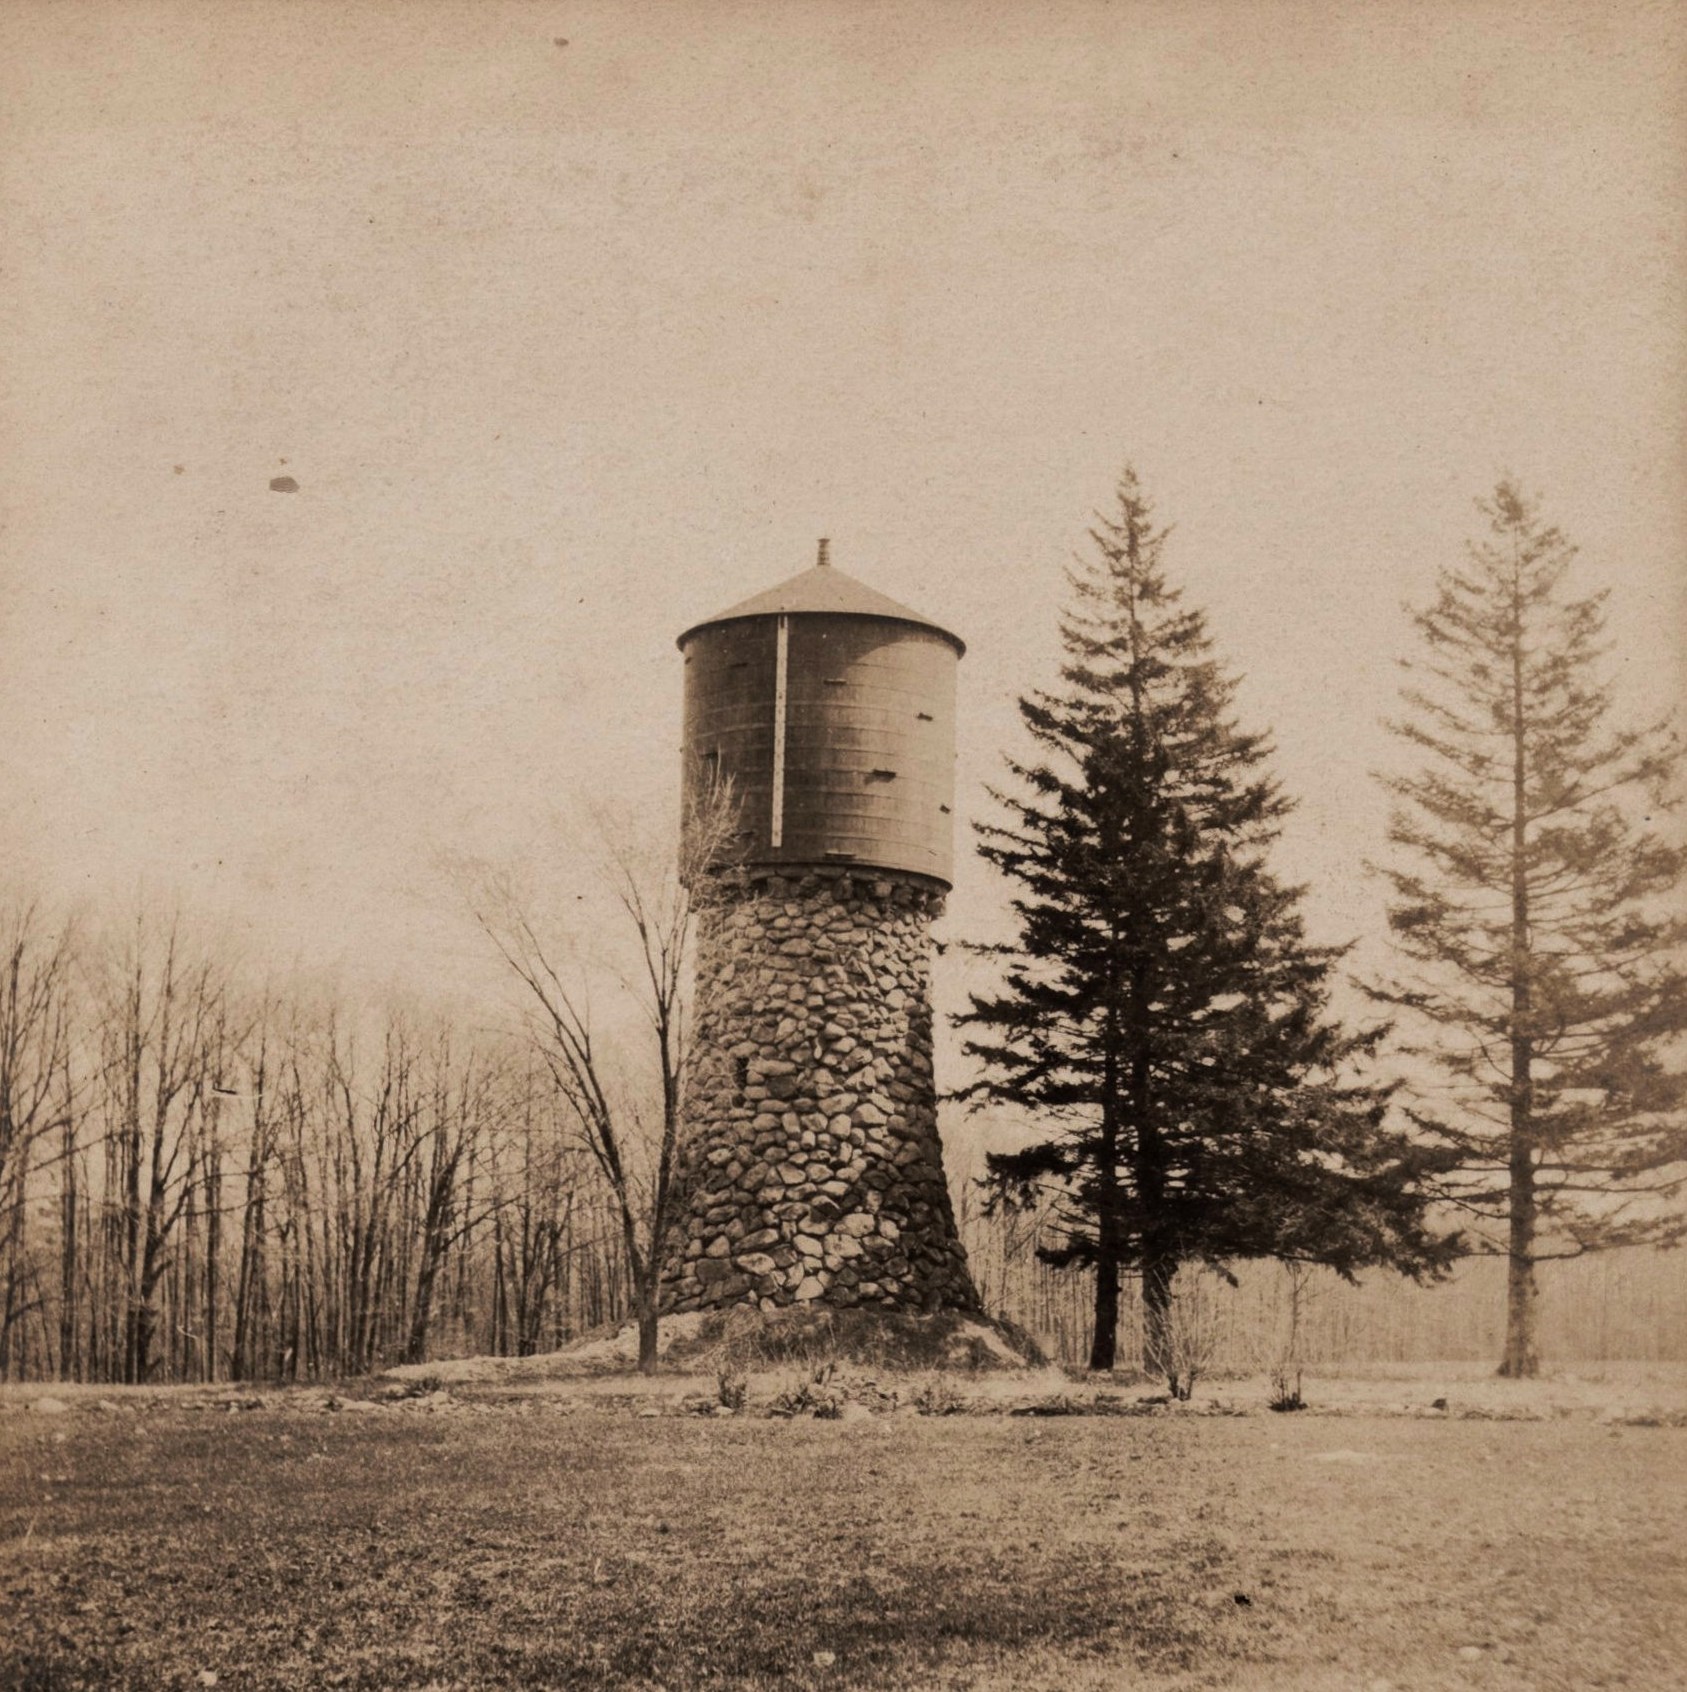 Black and white photograph of a cylindrical water tower atop a tall stone base next pine trees.